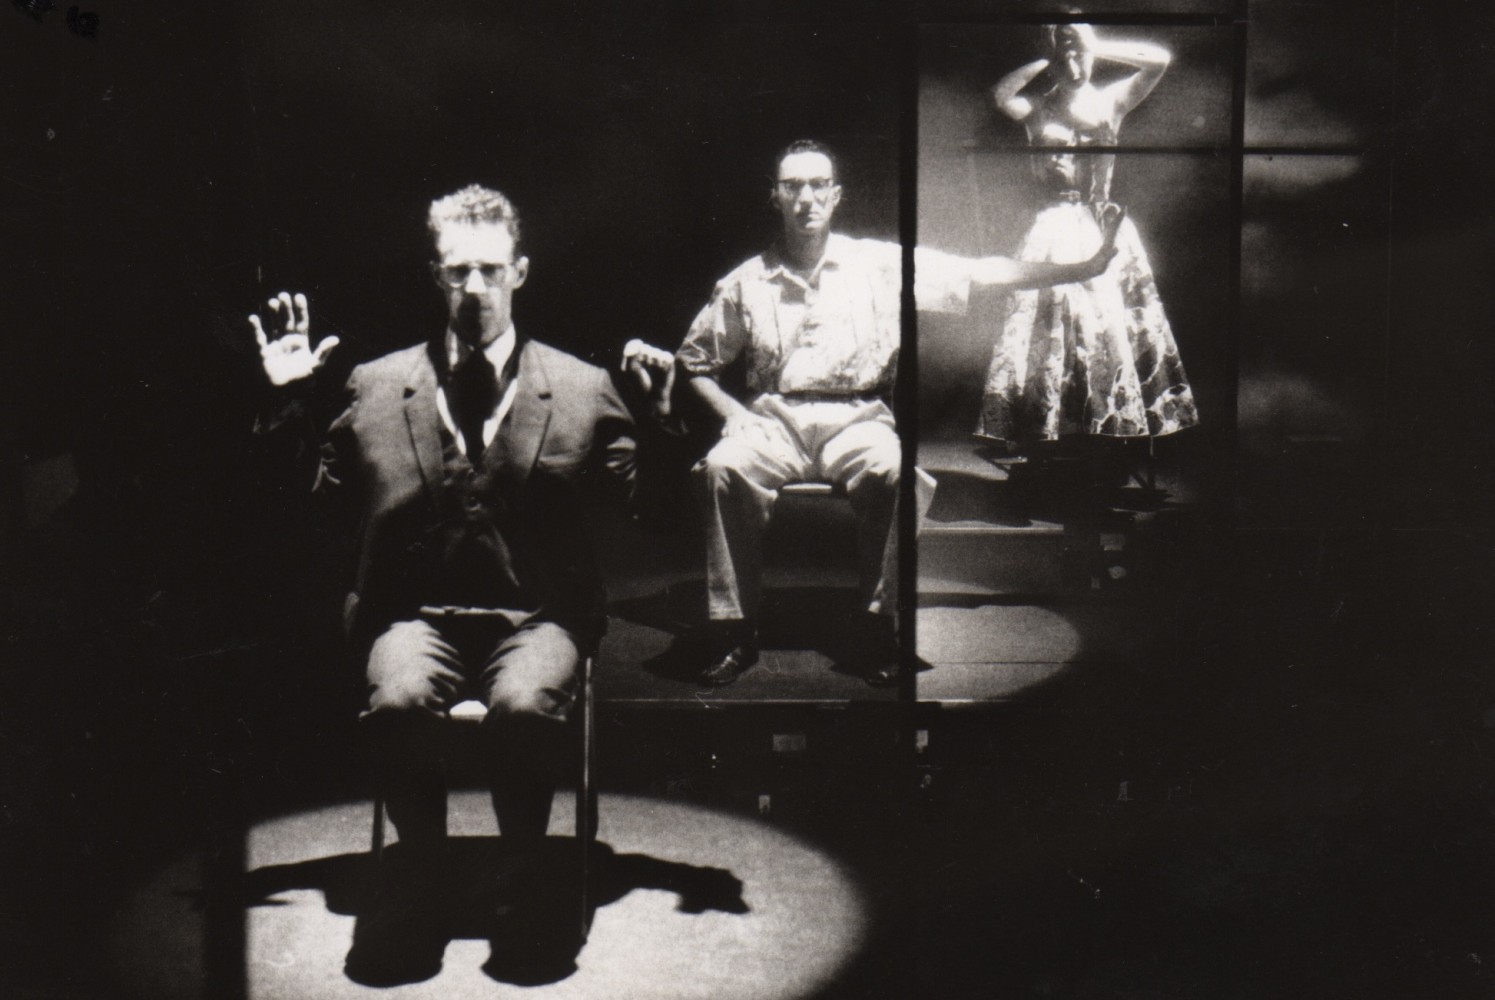 Production image of two men seated in spotlights and one woman standing, arms raised